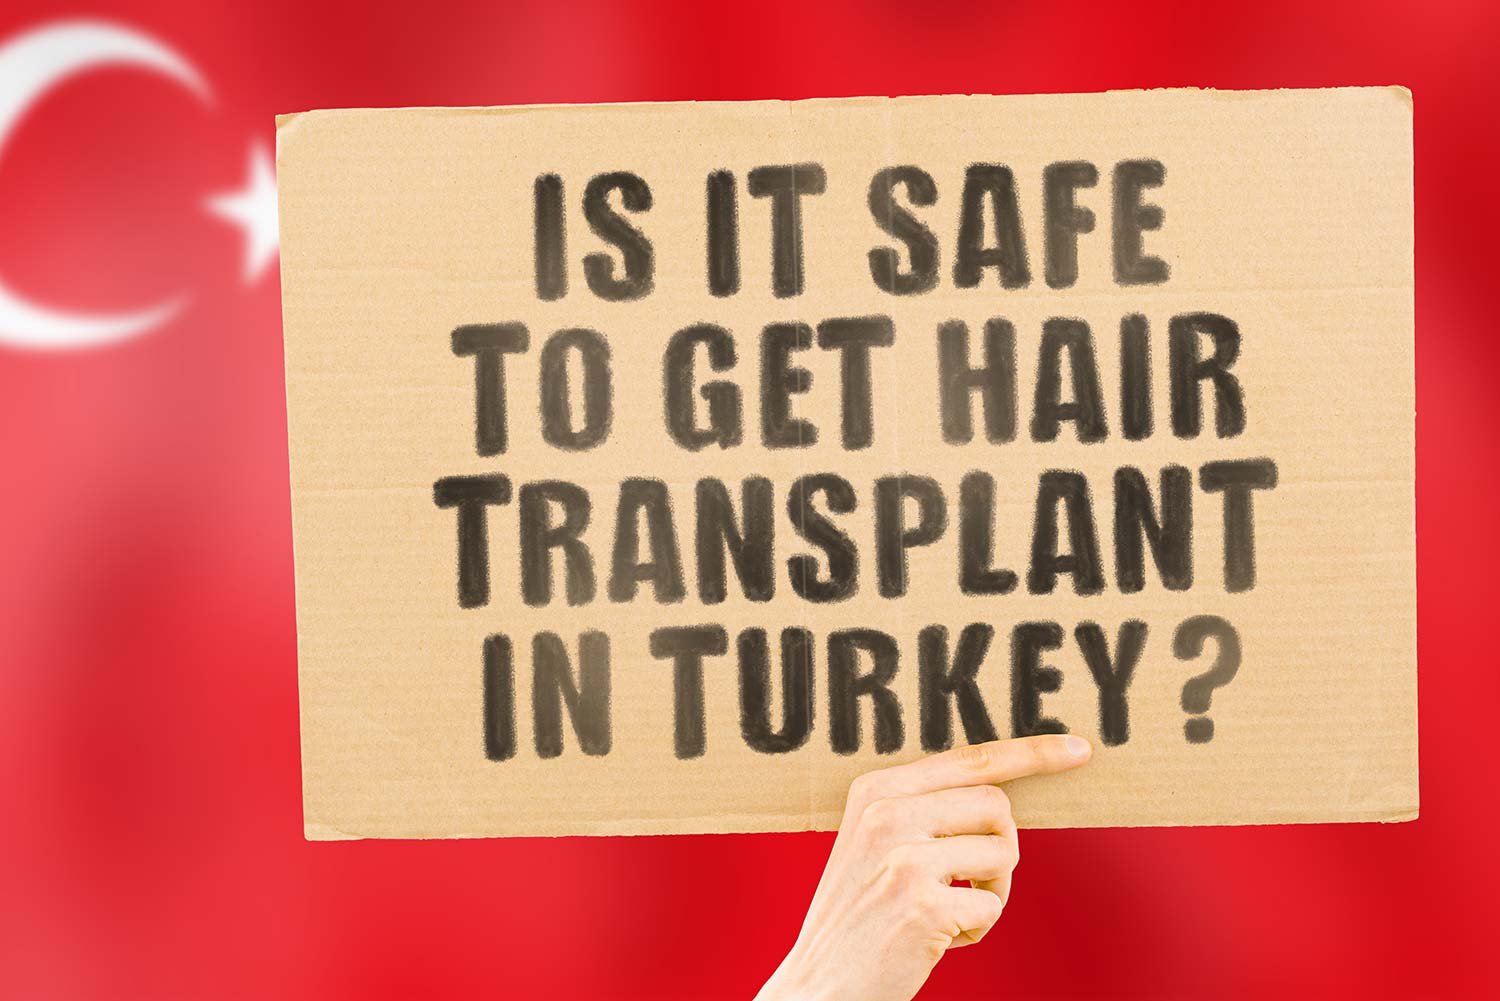 Should You Go To Turkey for a Hair Transplant